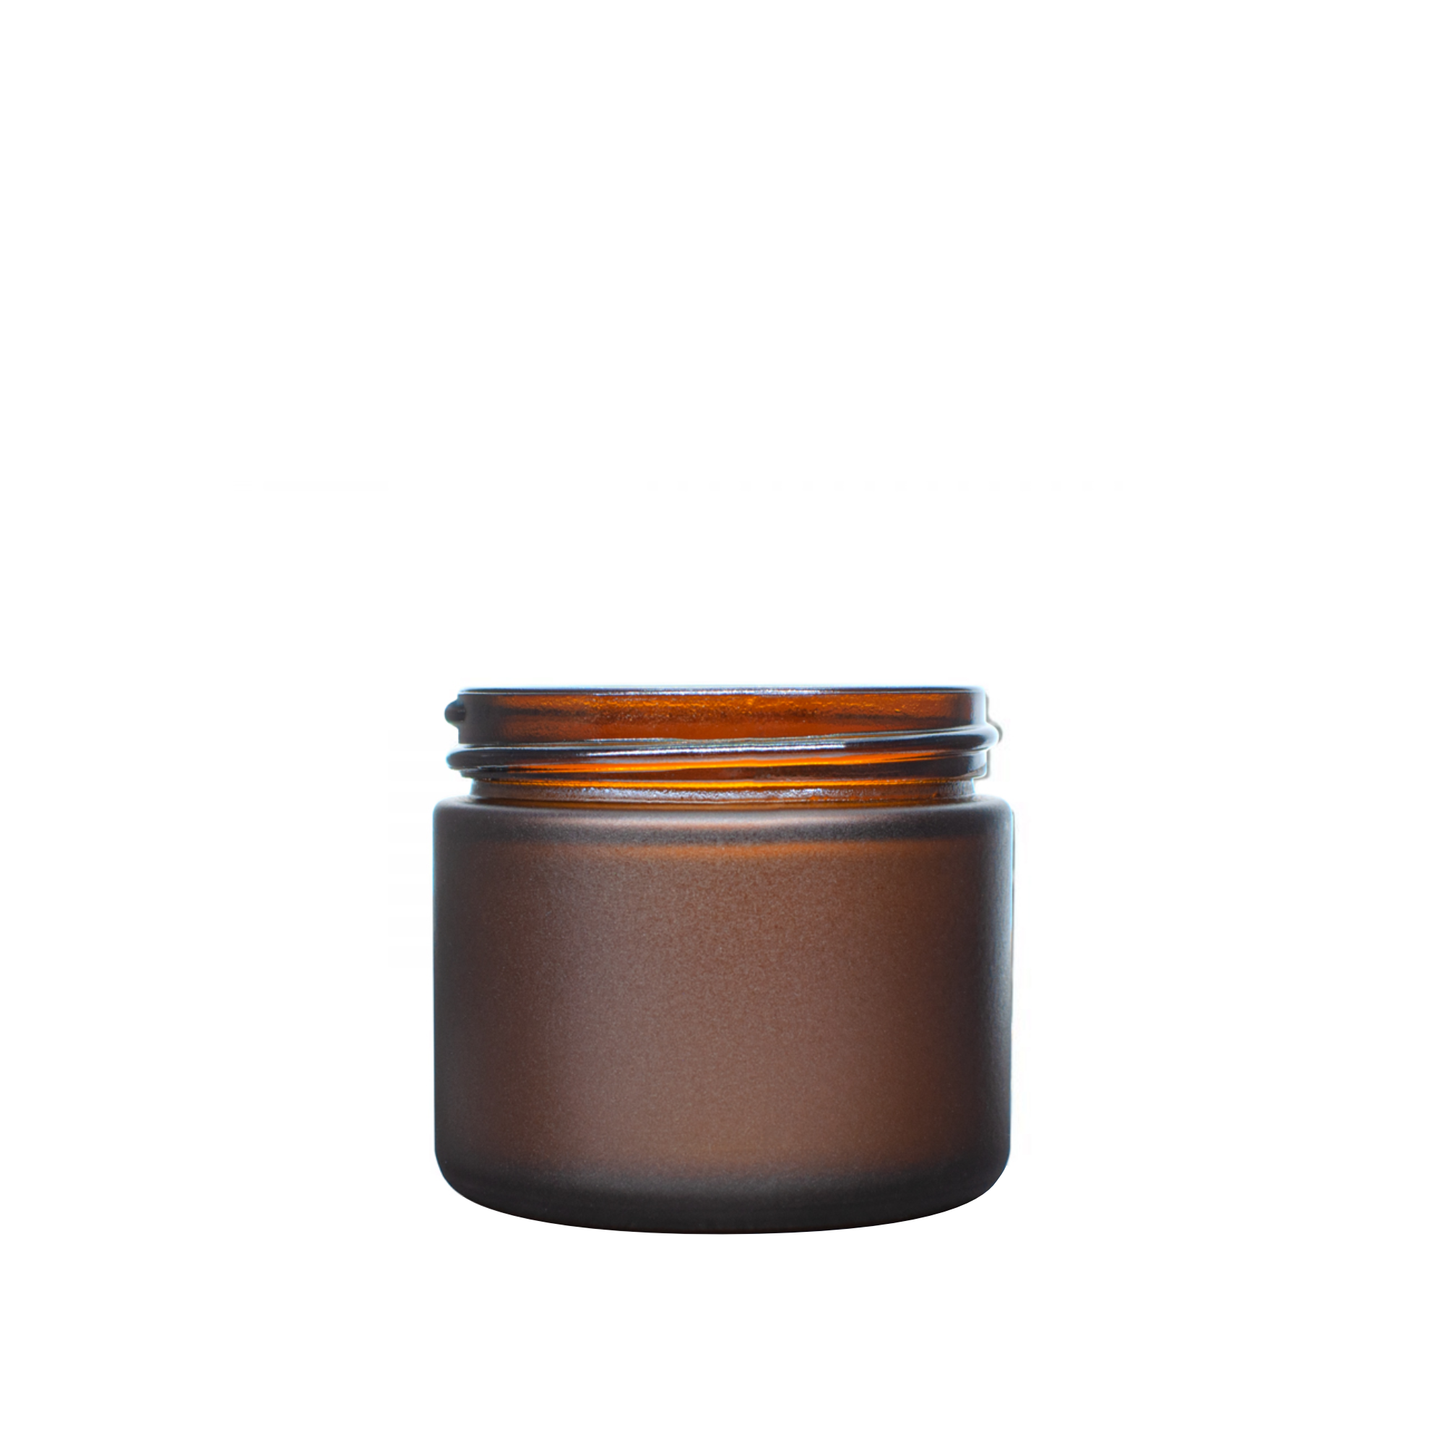 2 oz (60 ml) Frosted Amber Glass 53-400 Jar